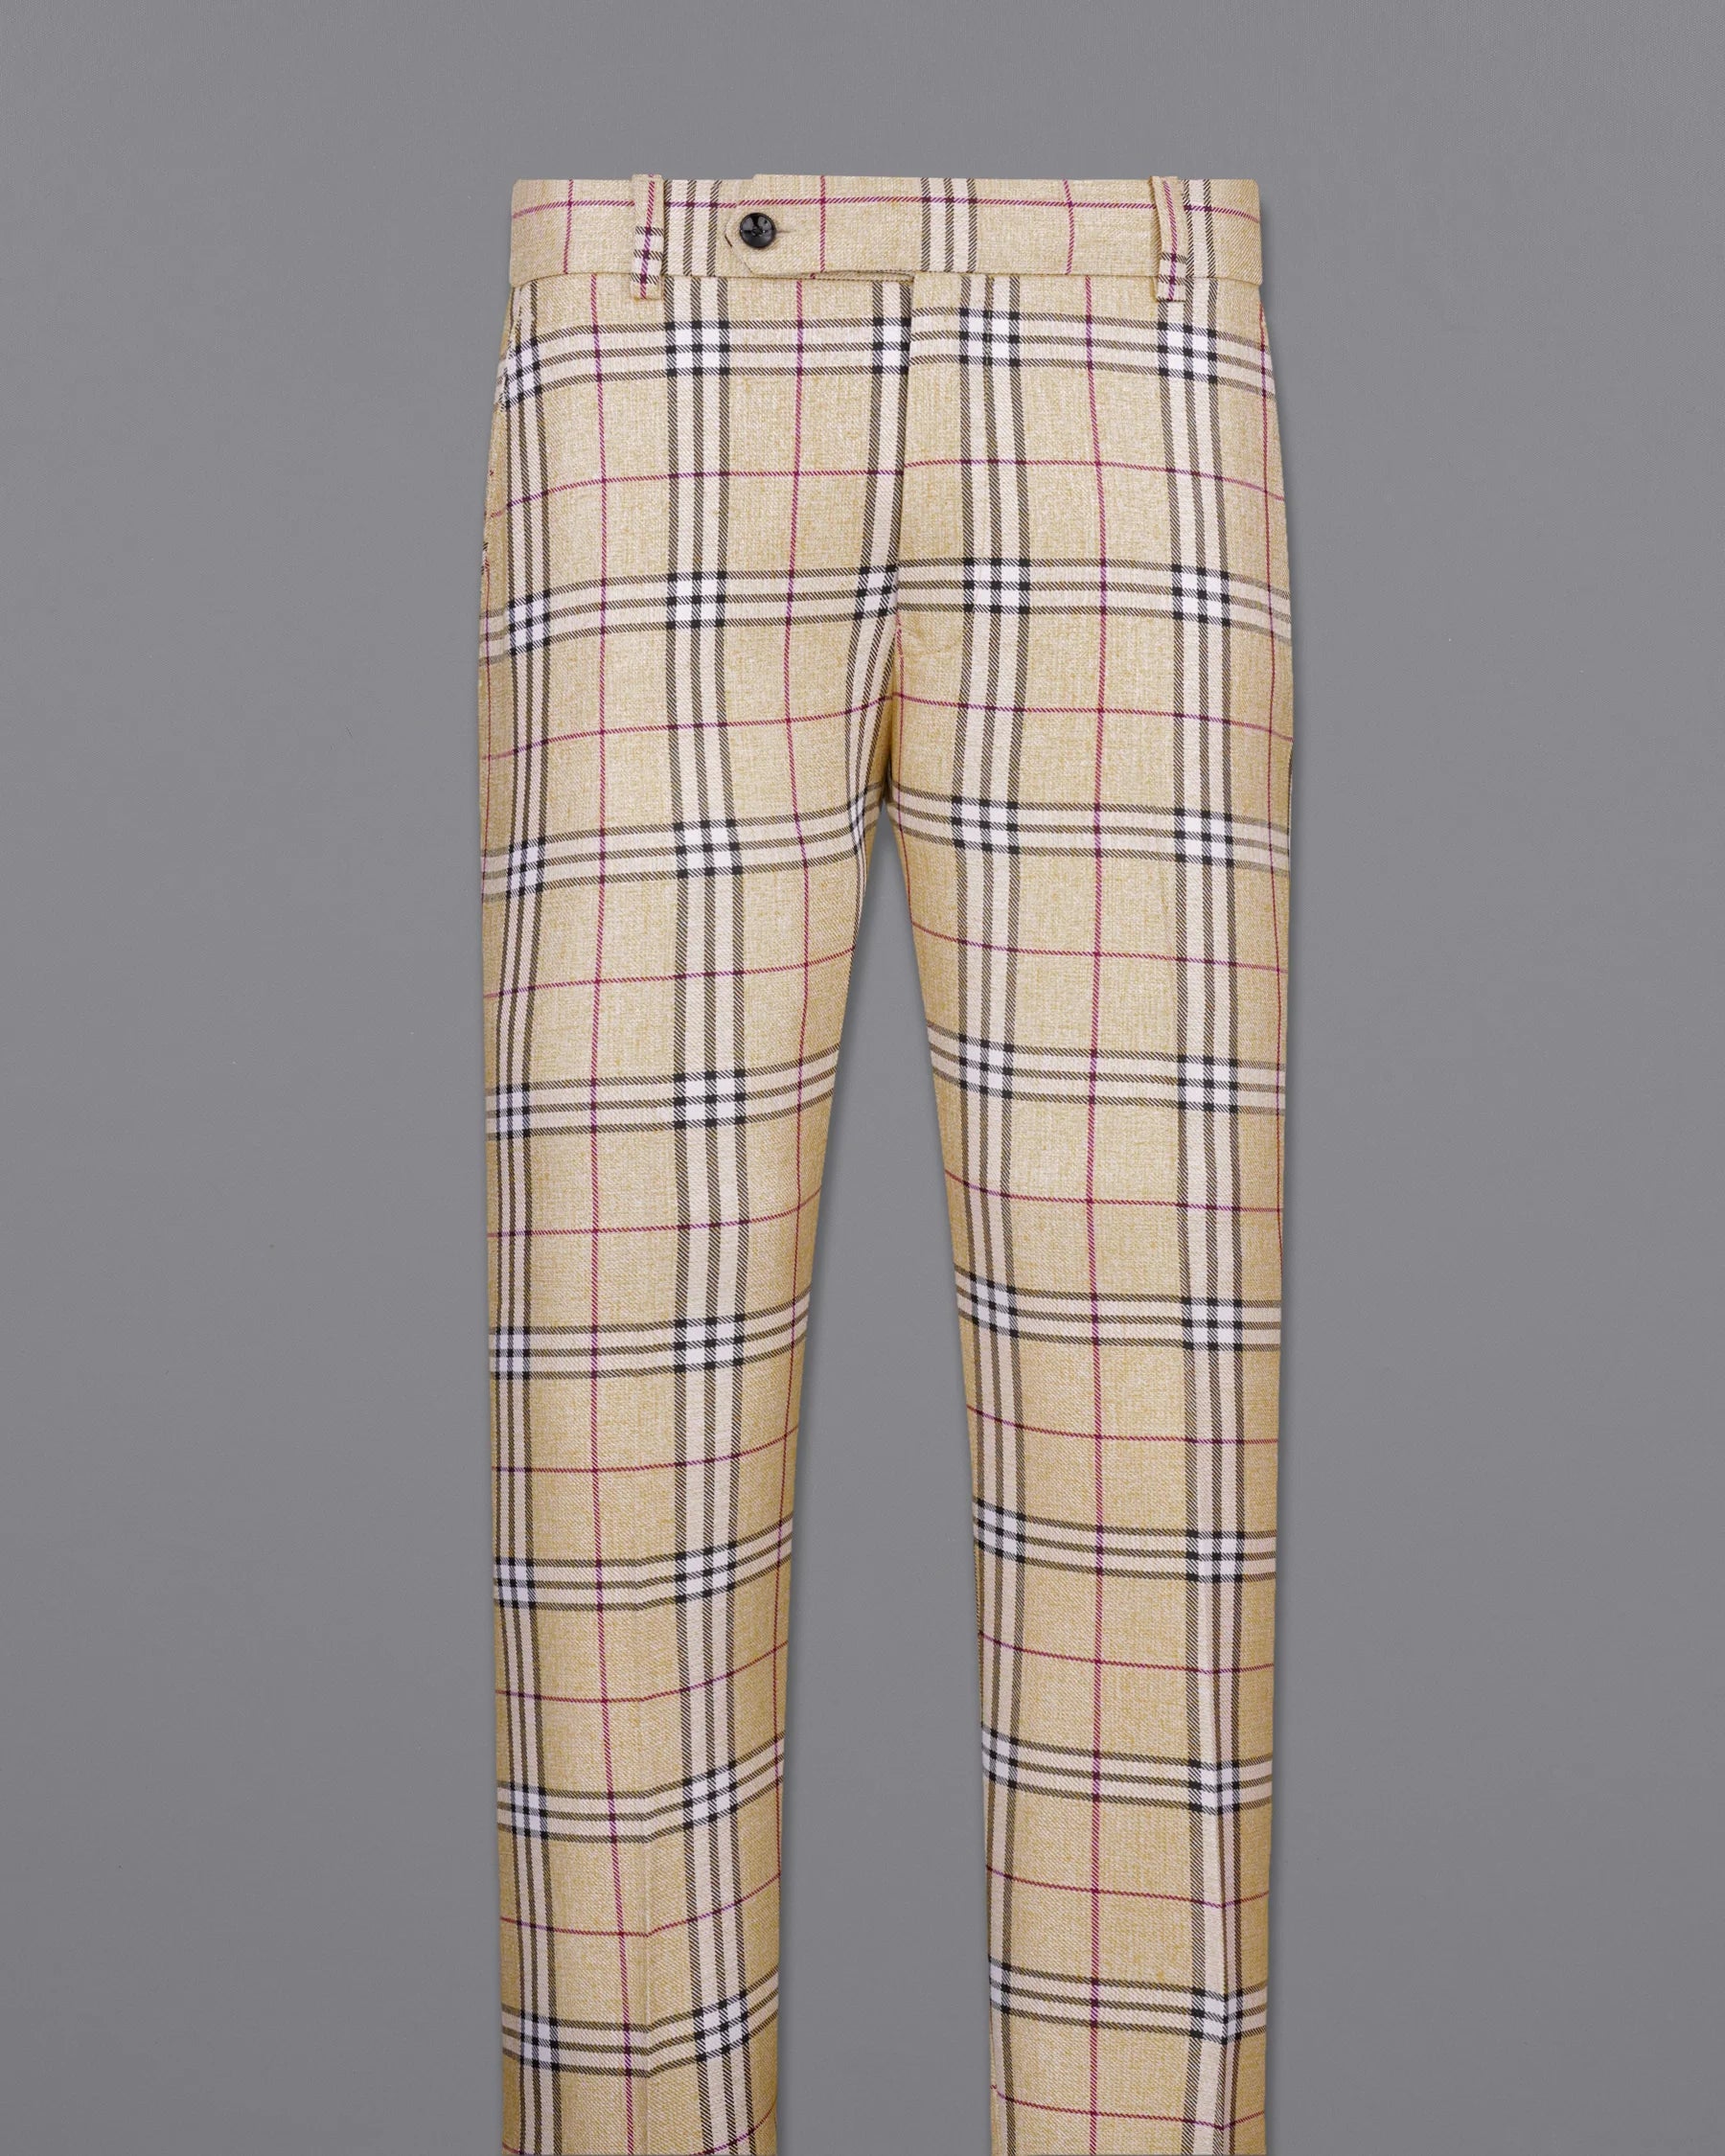 Sorrell Brown with Acadia Black Plaid Pant  T2138-28, T2138-30, T2138-32, T2138-34, T2138-36, T2138-38, T2138-40, T2138-42, T2138-44